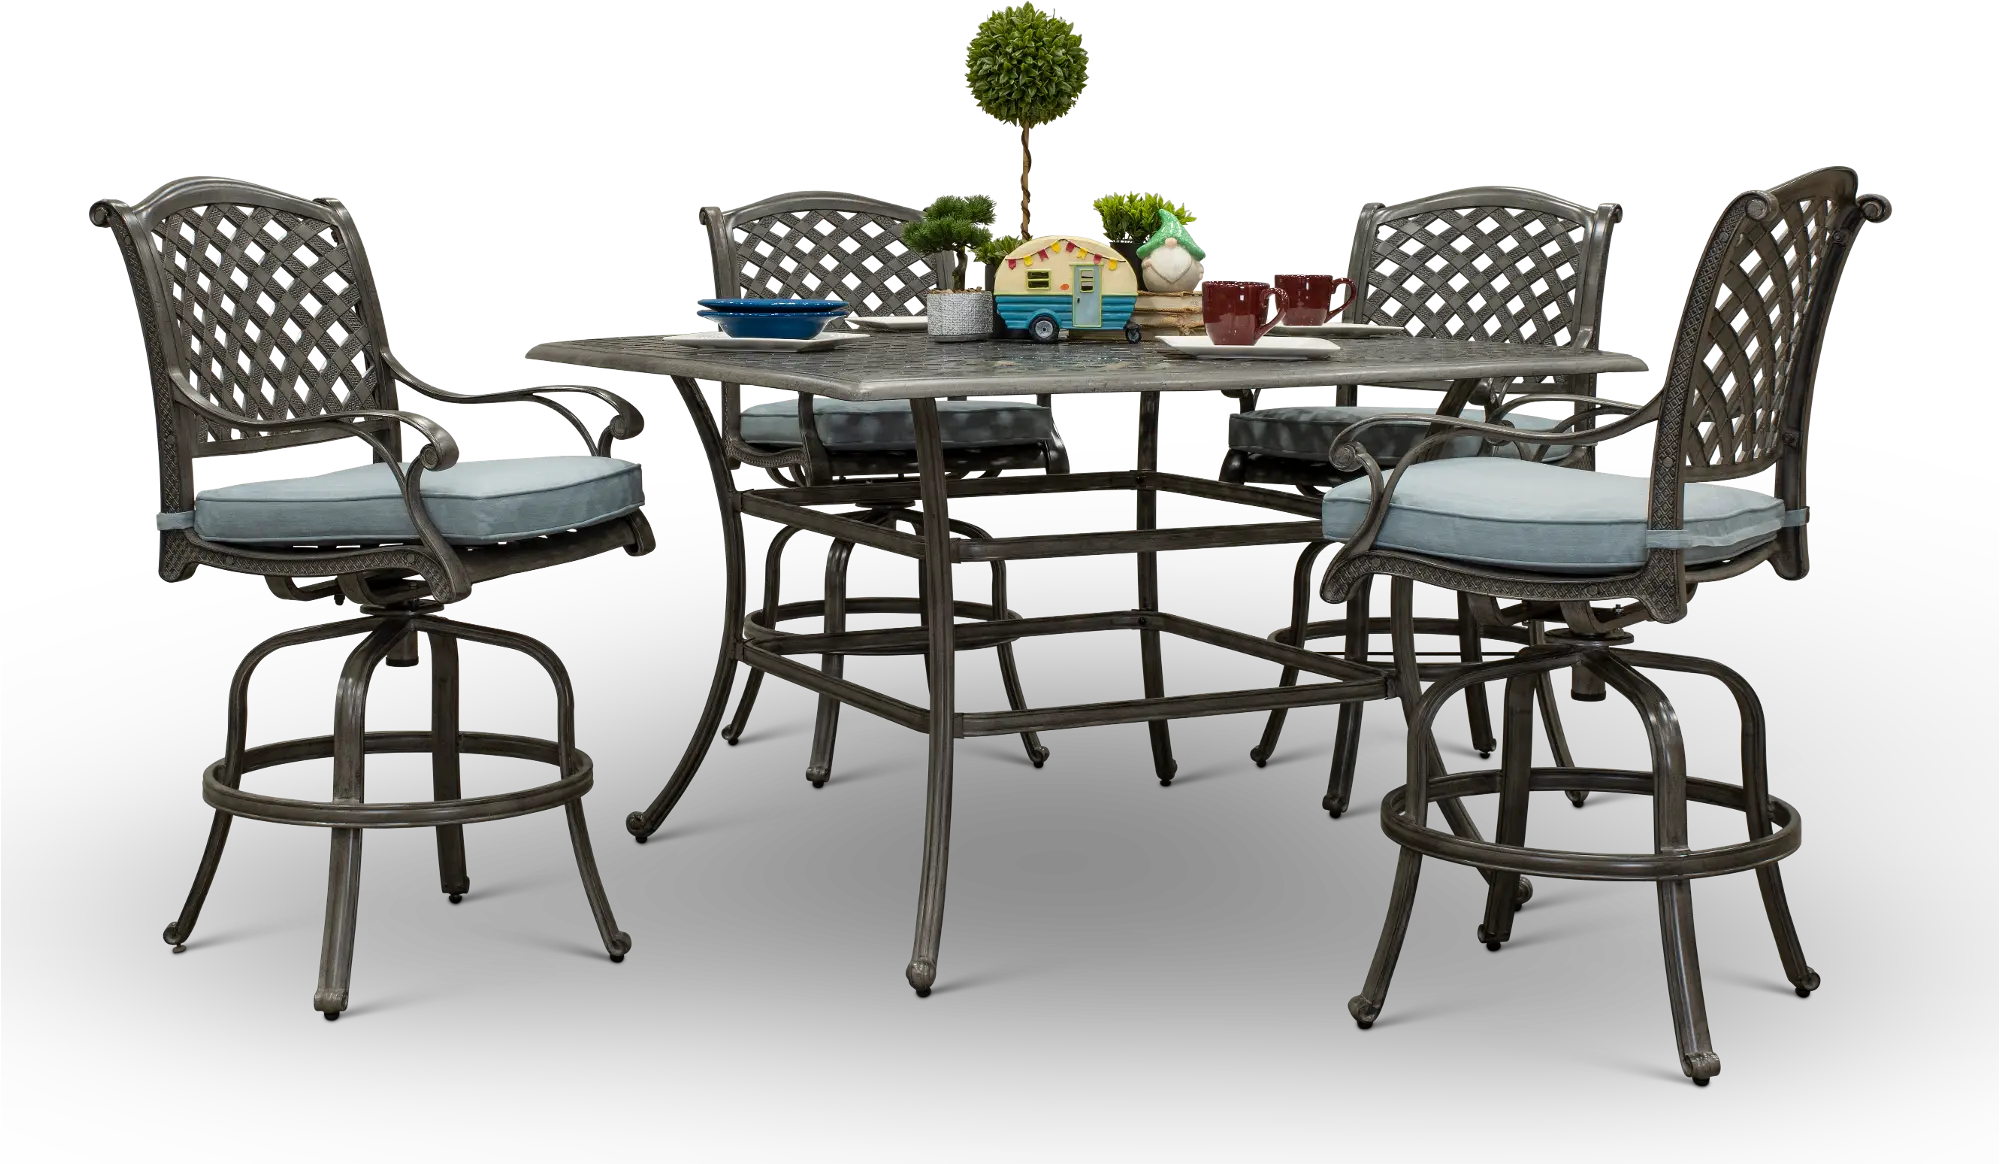 Macan 5 Piece Bar-Height Patio Dining Set with Square Table